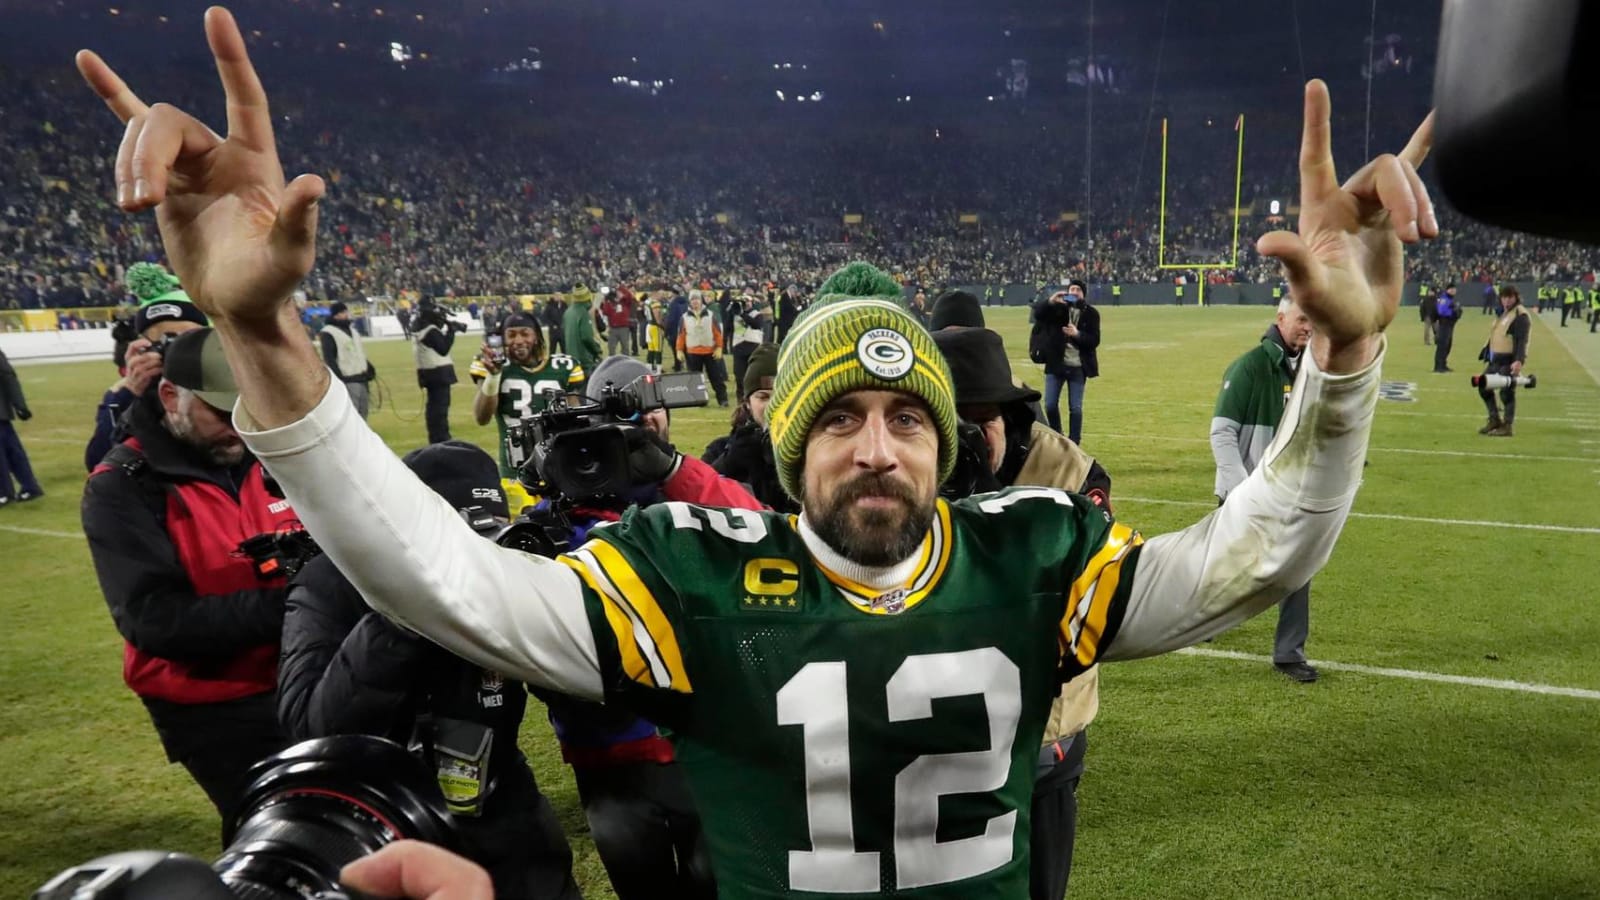 Aaron Rodgers still has 'competitive drive for excellence'